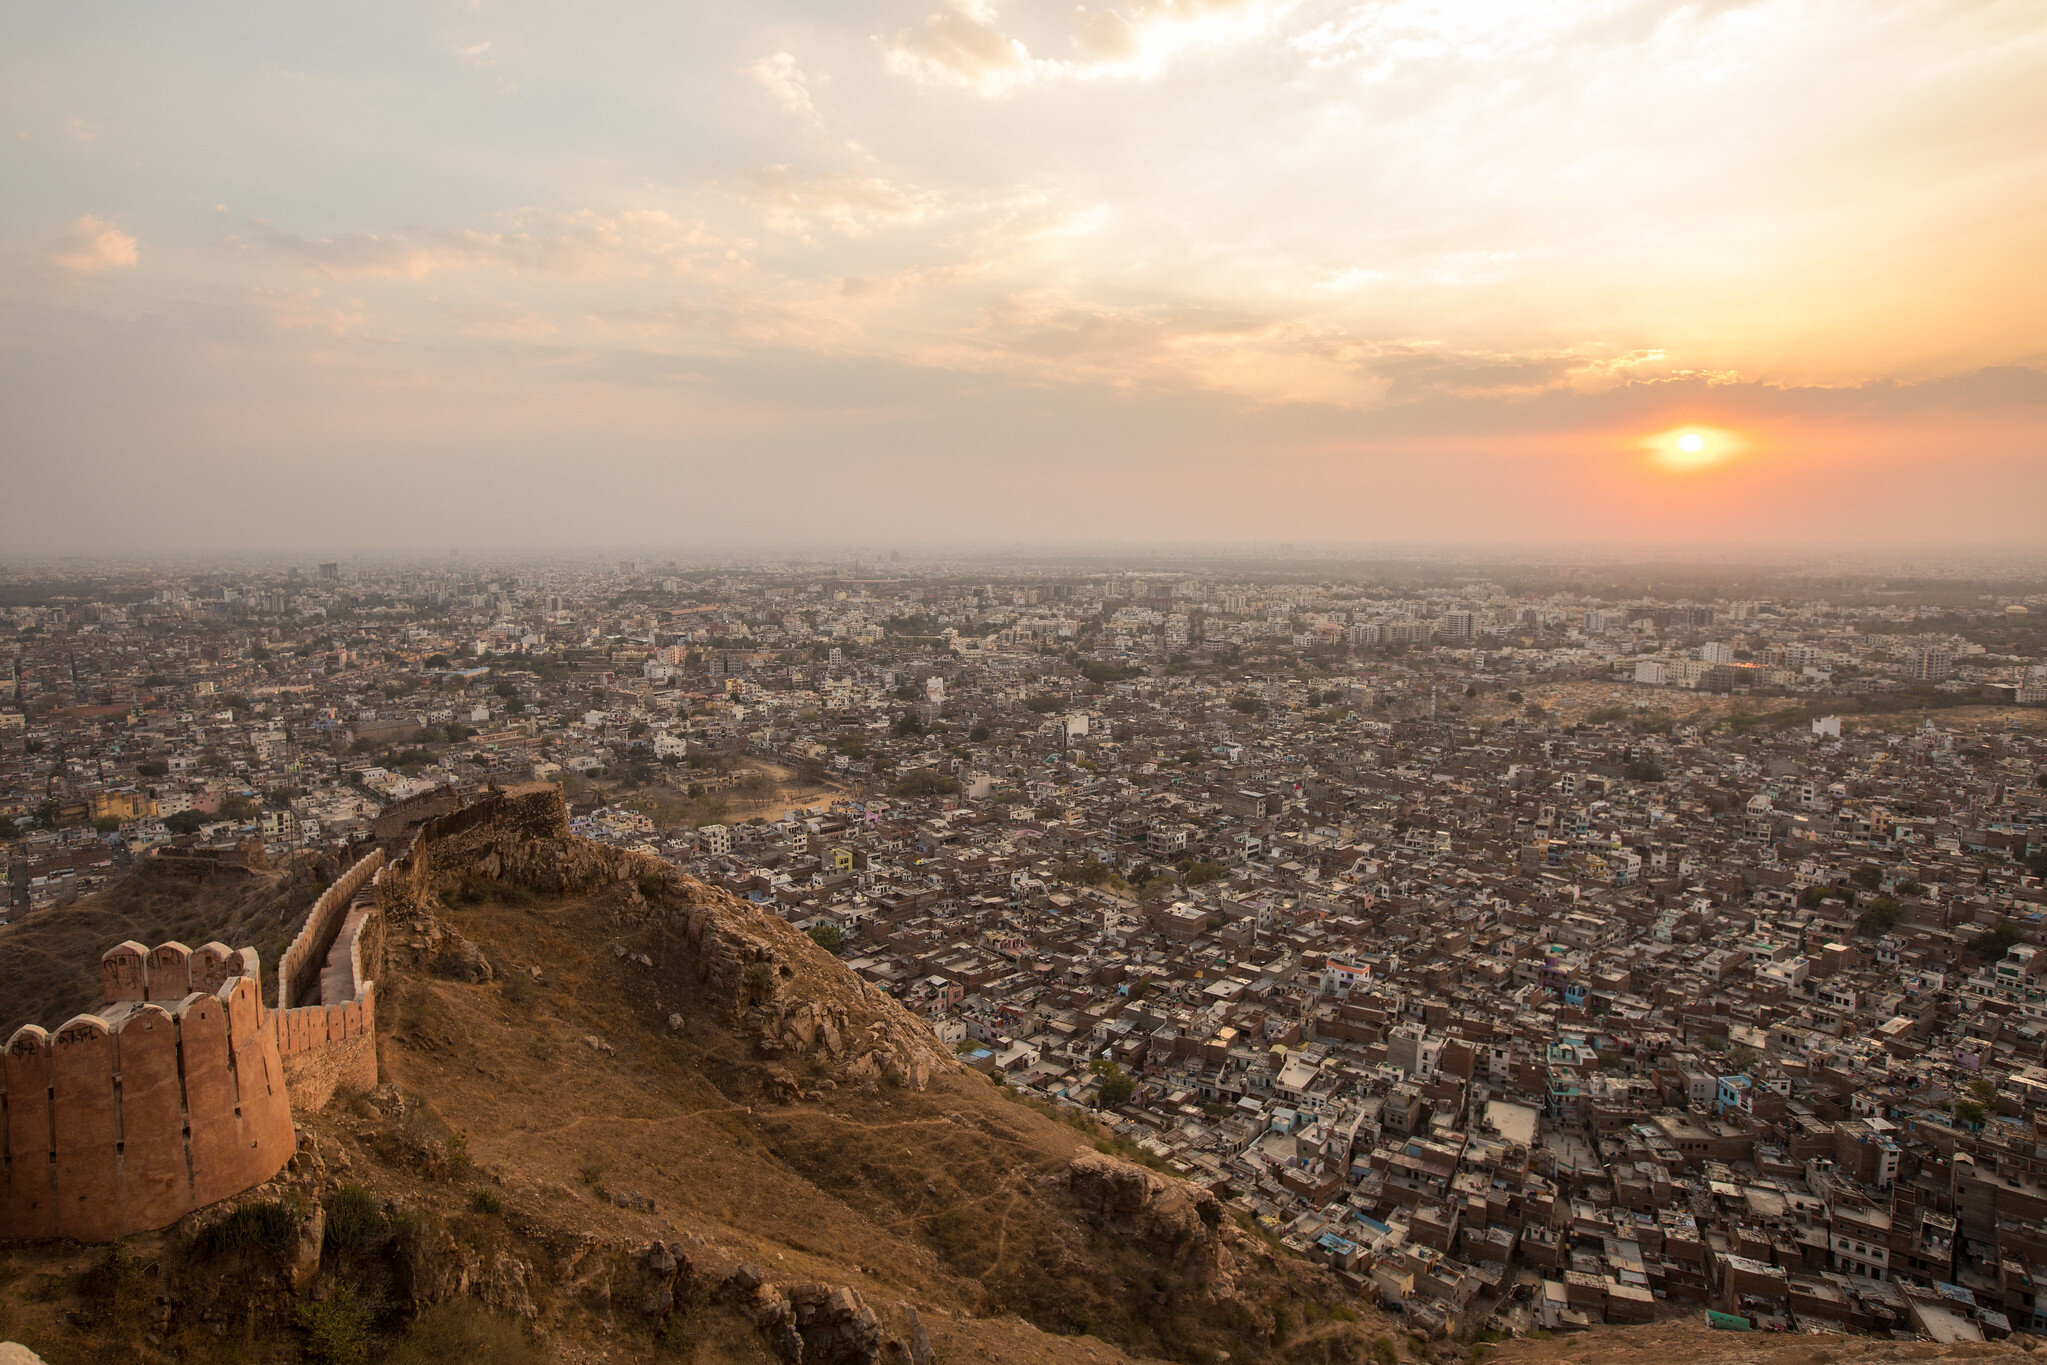 The sun sets over the city of Jaipur, also referred to as the Pink City in Rajasthan, India.